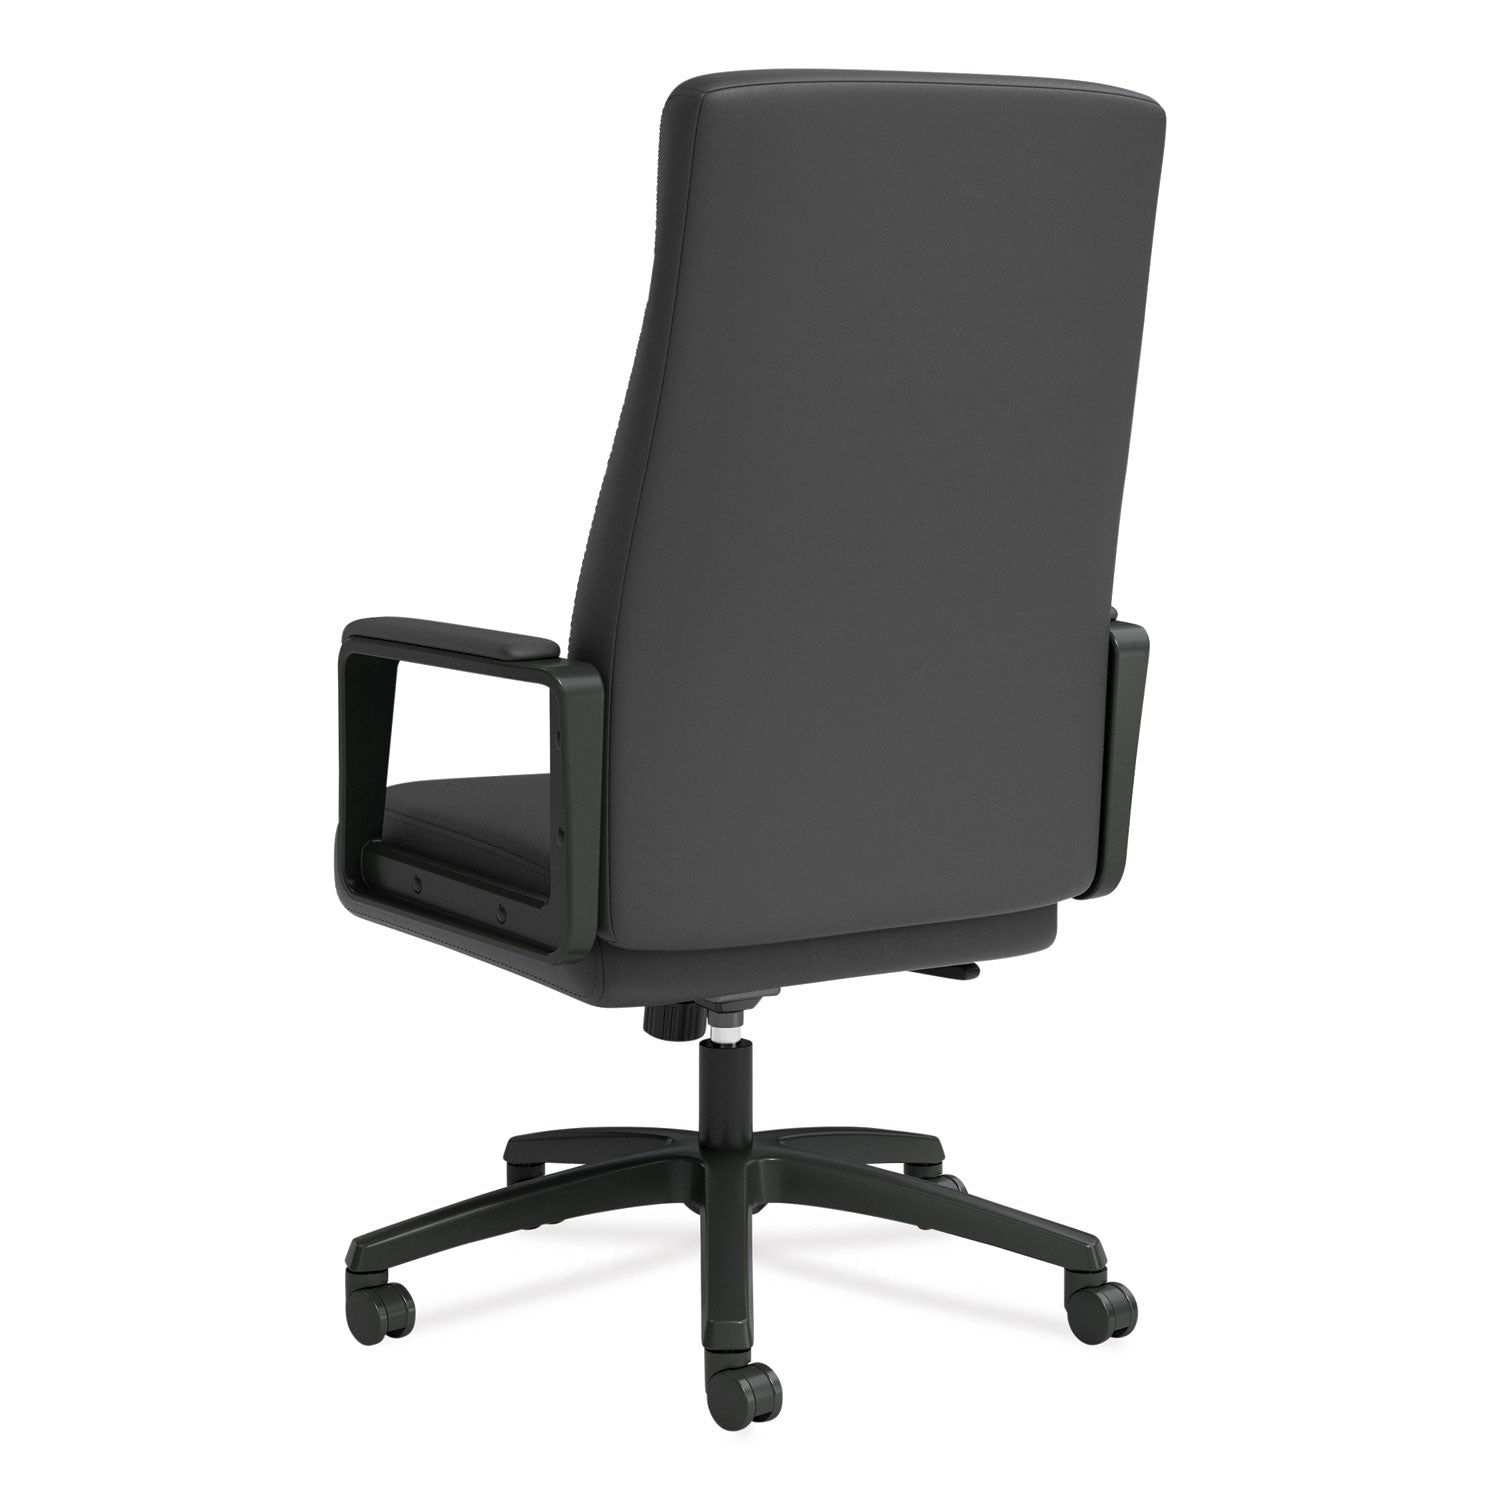 prestige-bonded-leather-manager-chair-supports-up-to-275-lb-black-seat-back-black-base_uos59408 - 3